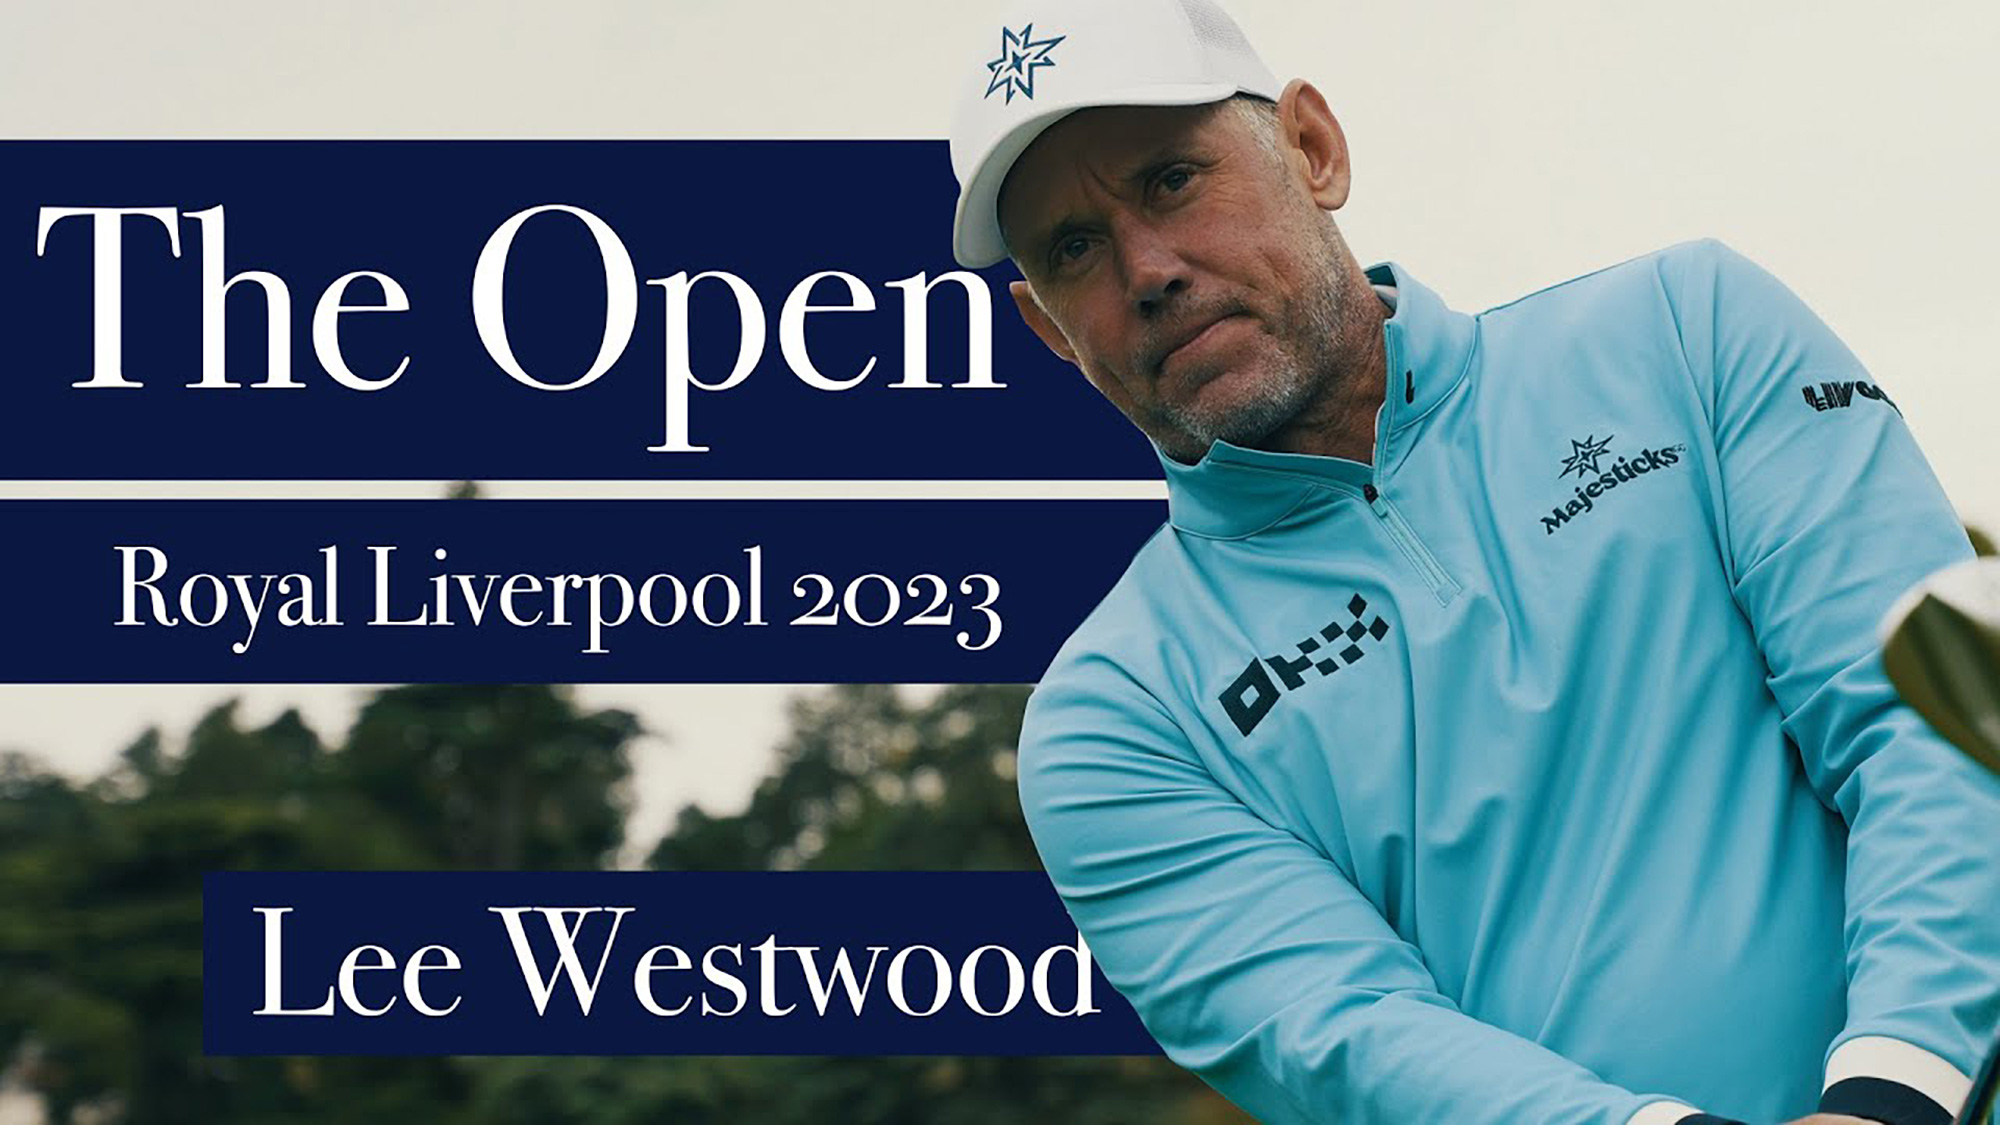 Lee Westwood on The Open